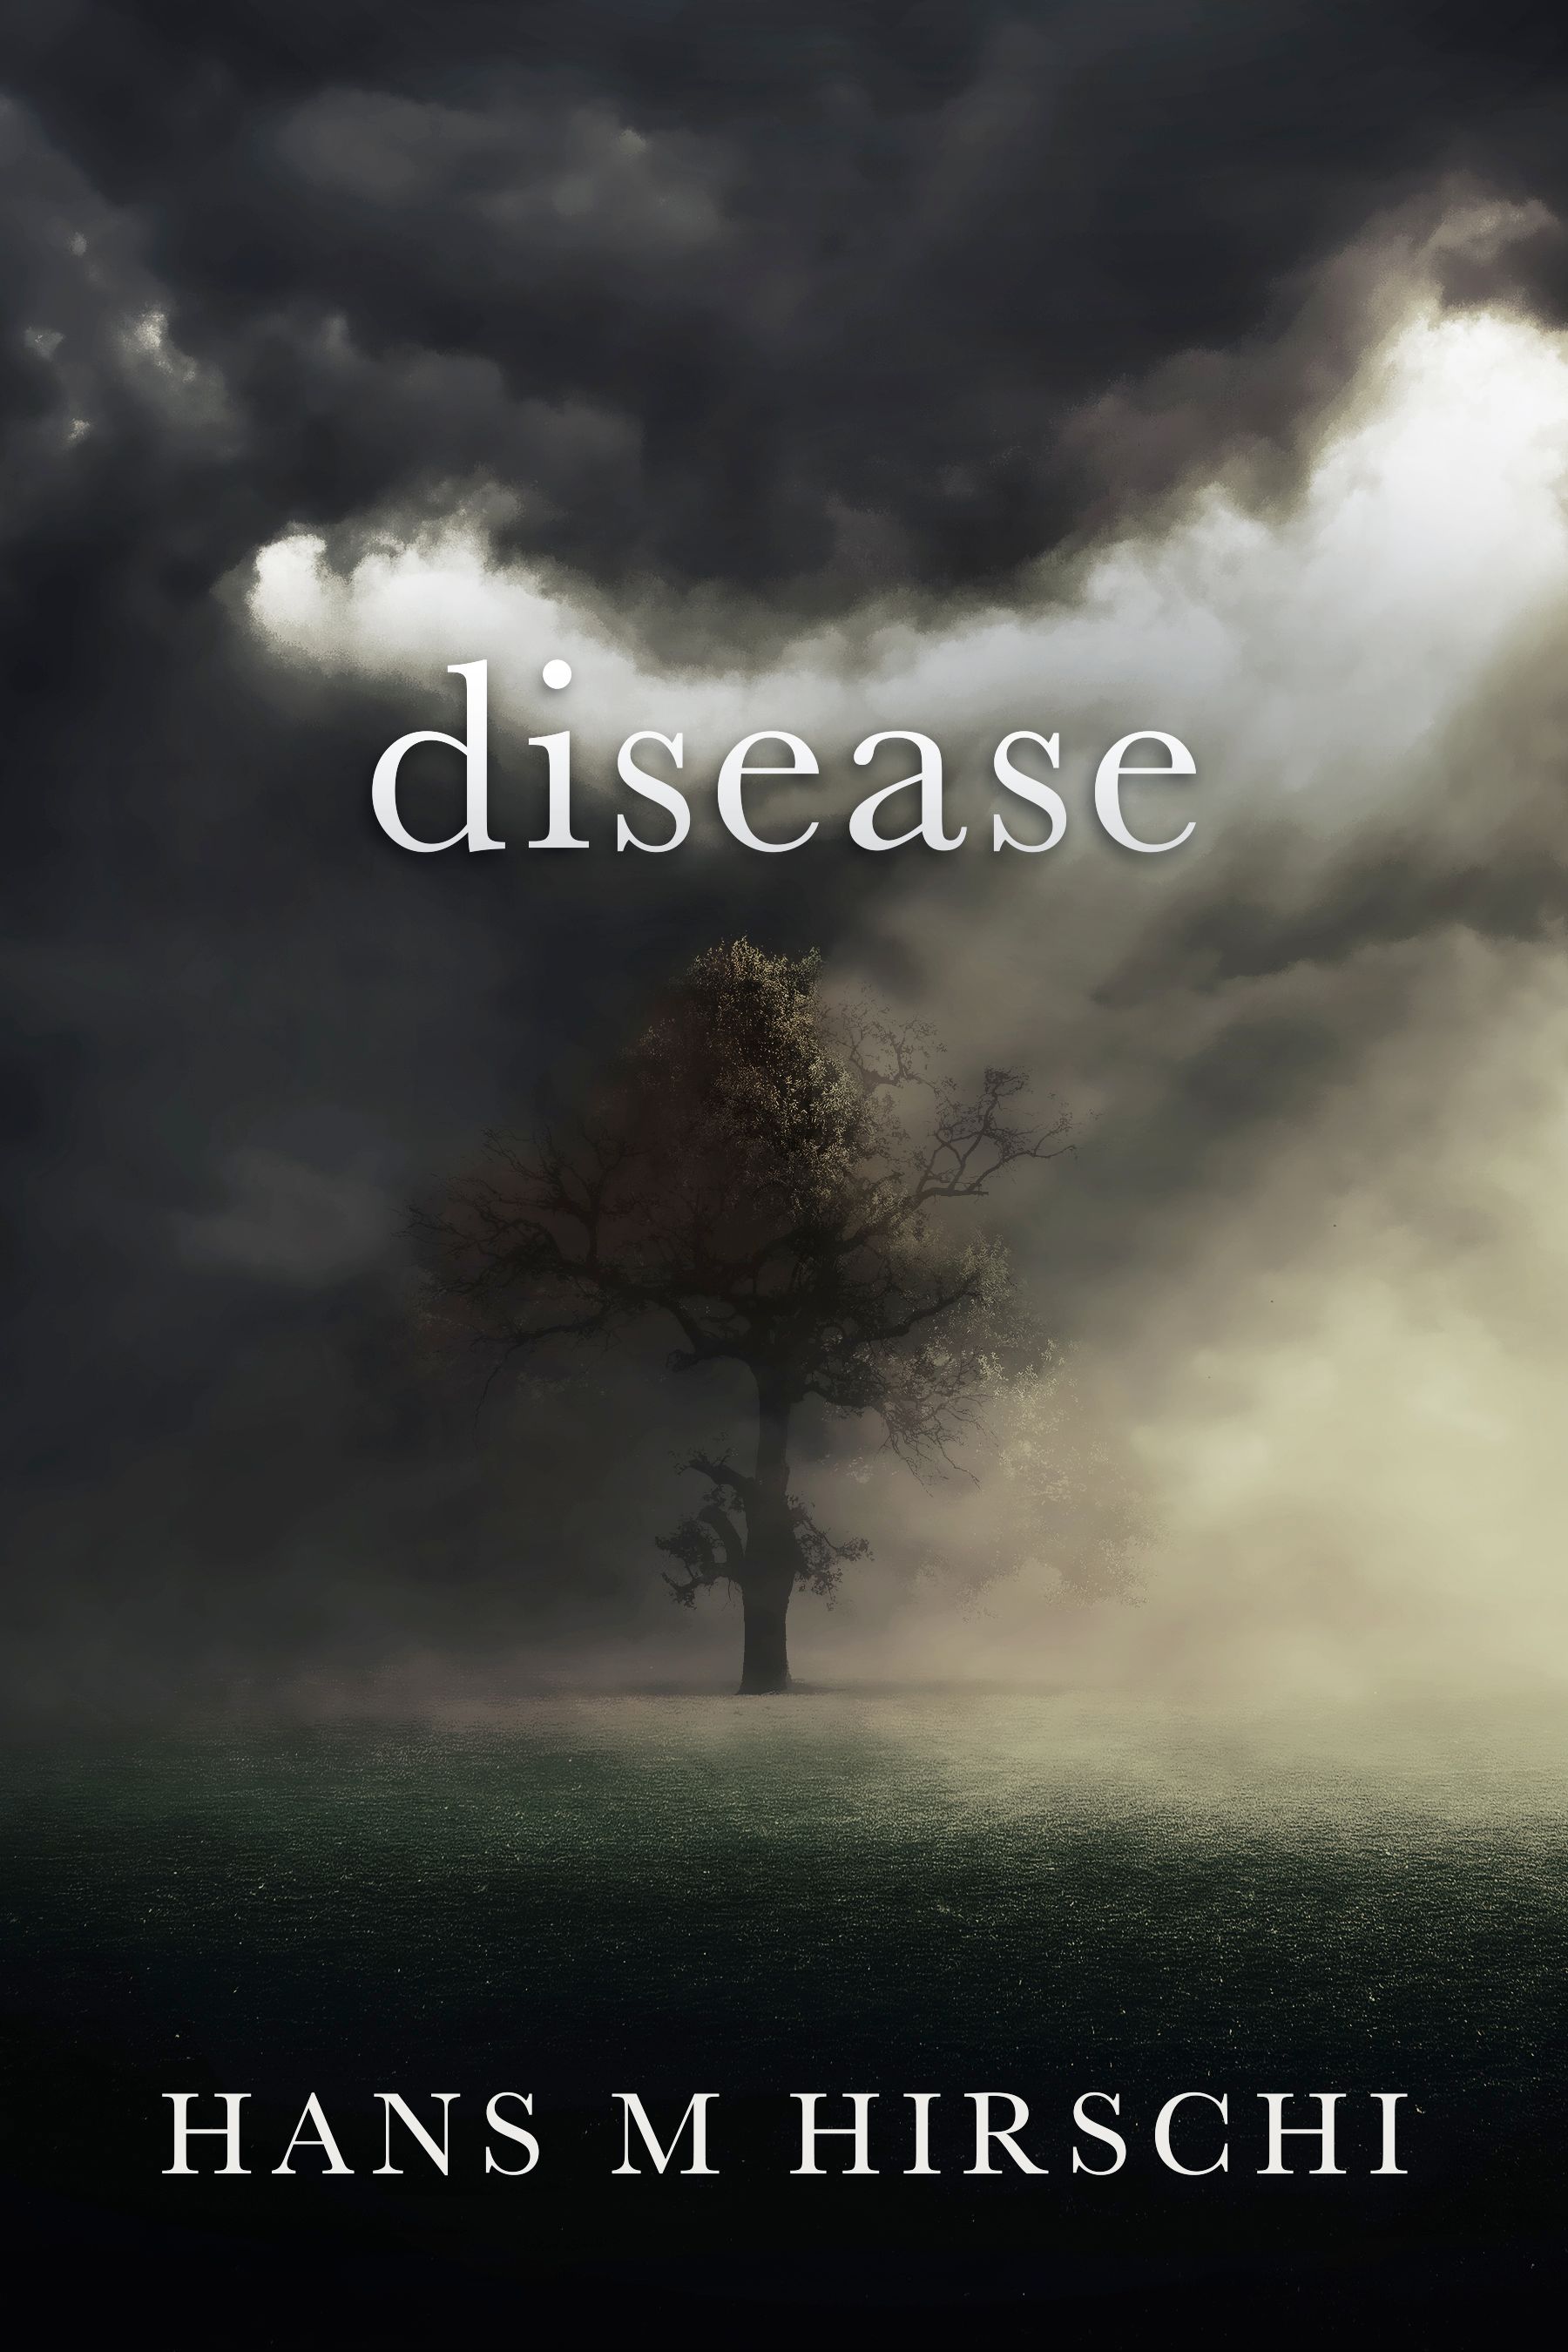 Disease: When Life takes an Unexpected Turn, eBook by Hans M Hirschi